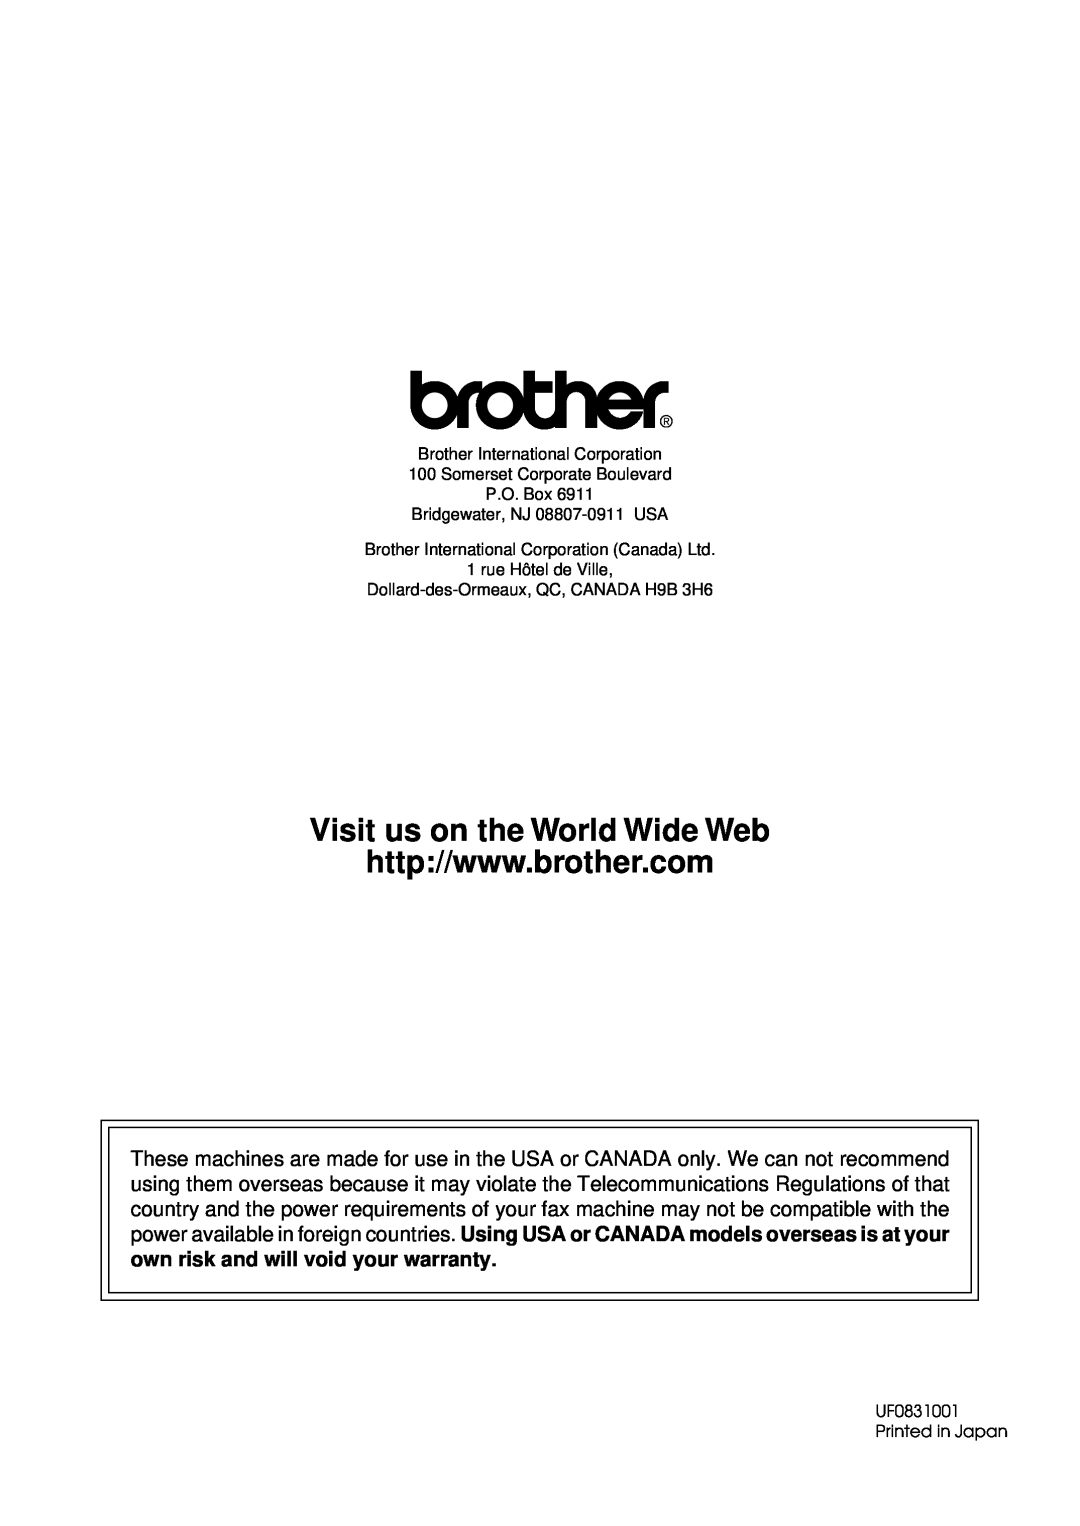 Brother FAX 255 Visit us on the World Wide Web, Brother International Corporation 100 Somerset Corporate Boulevard 